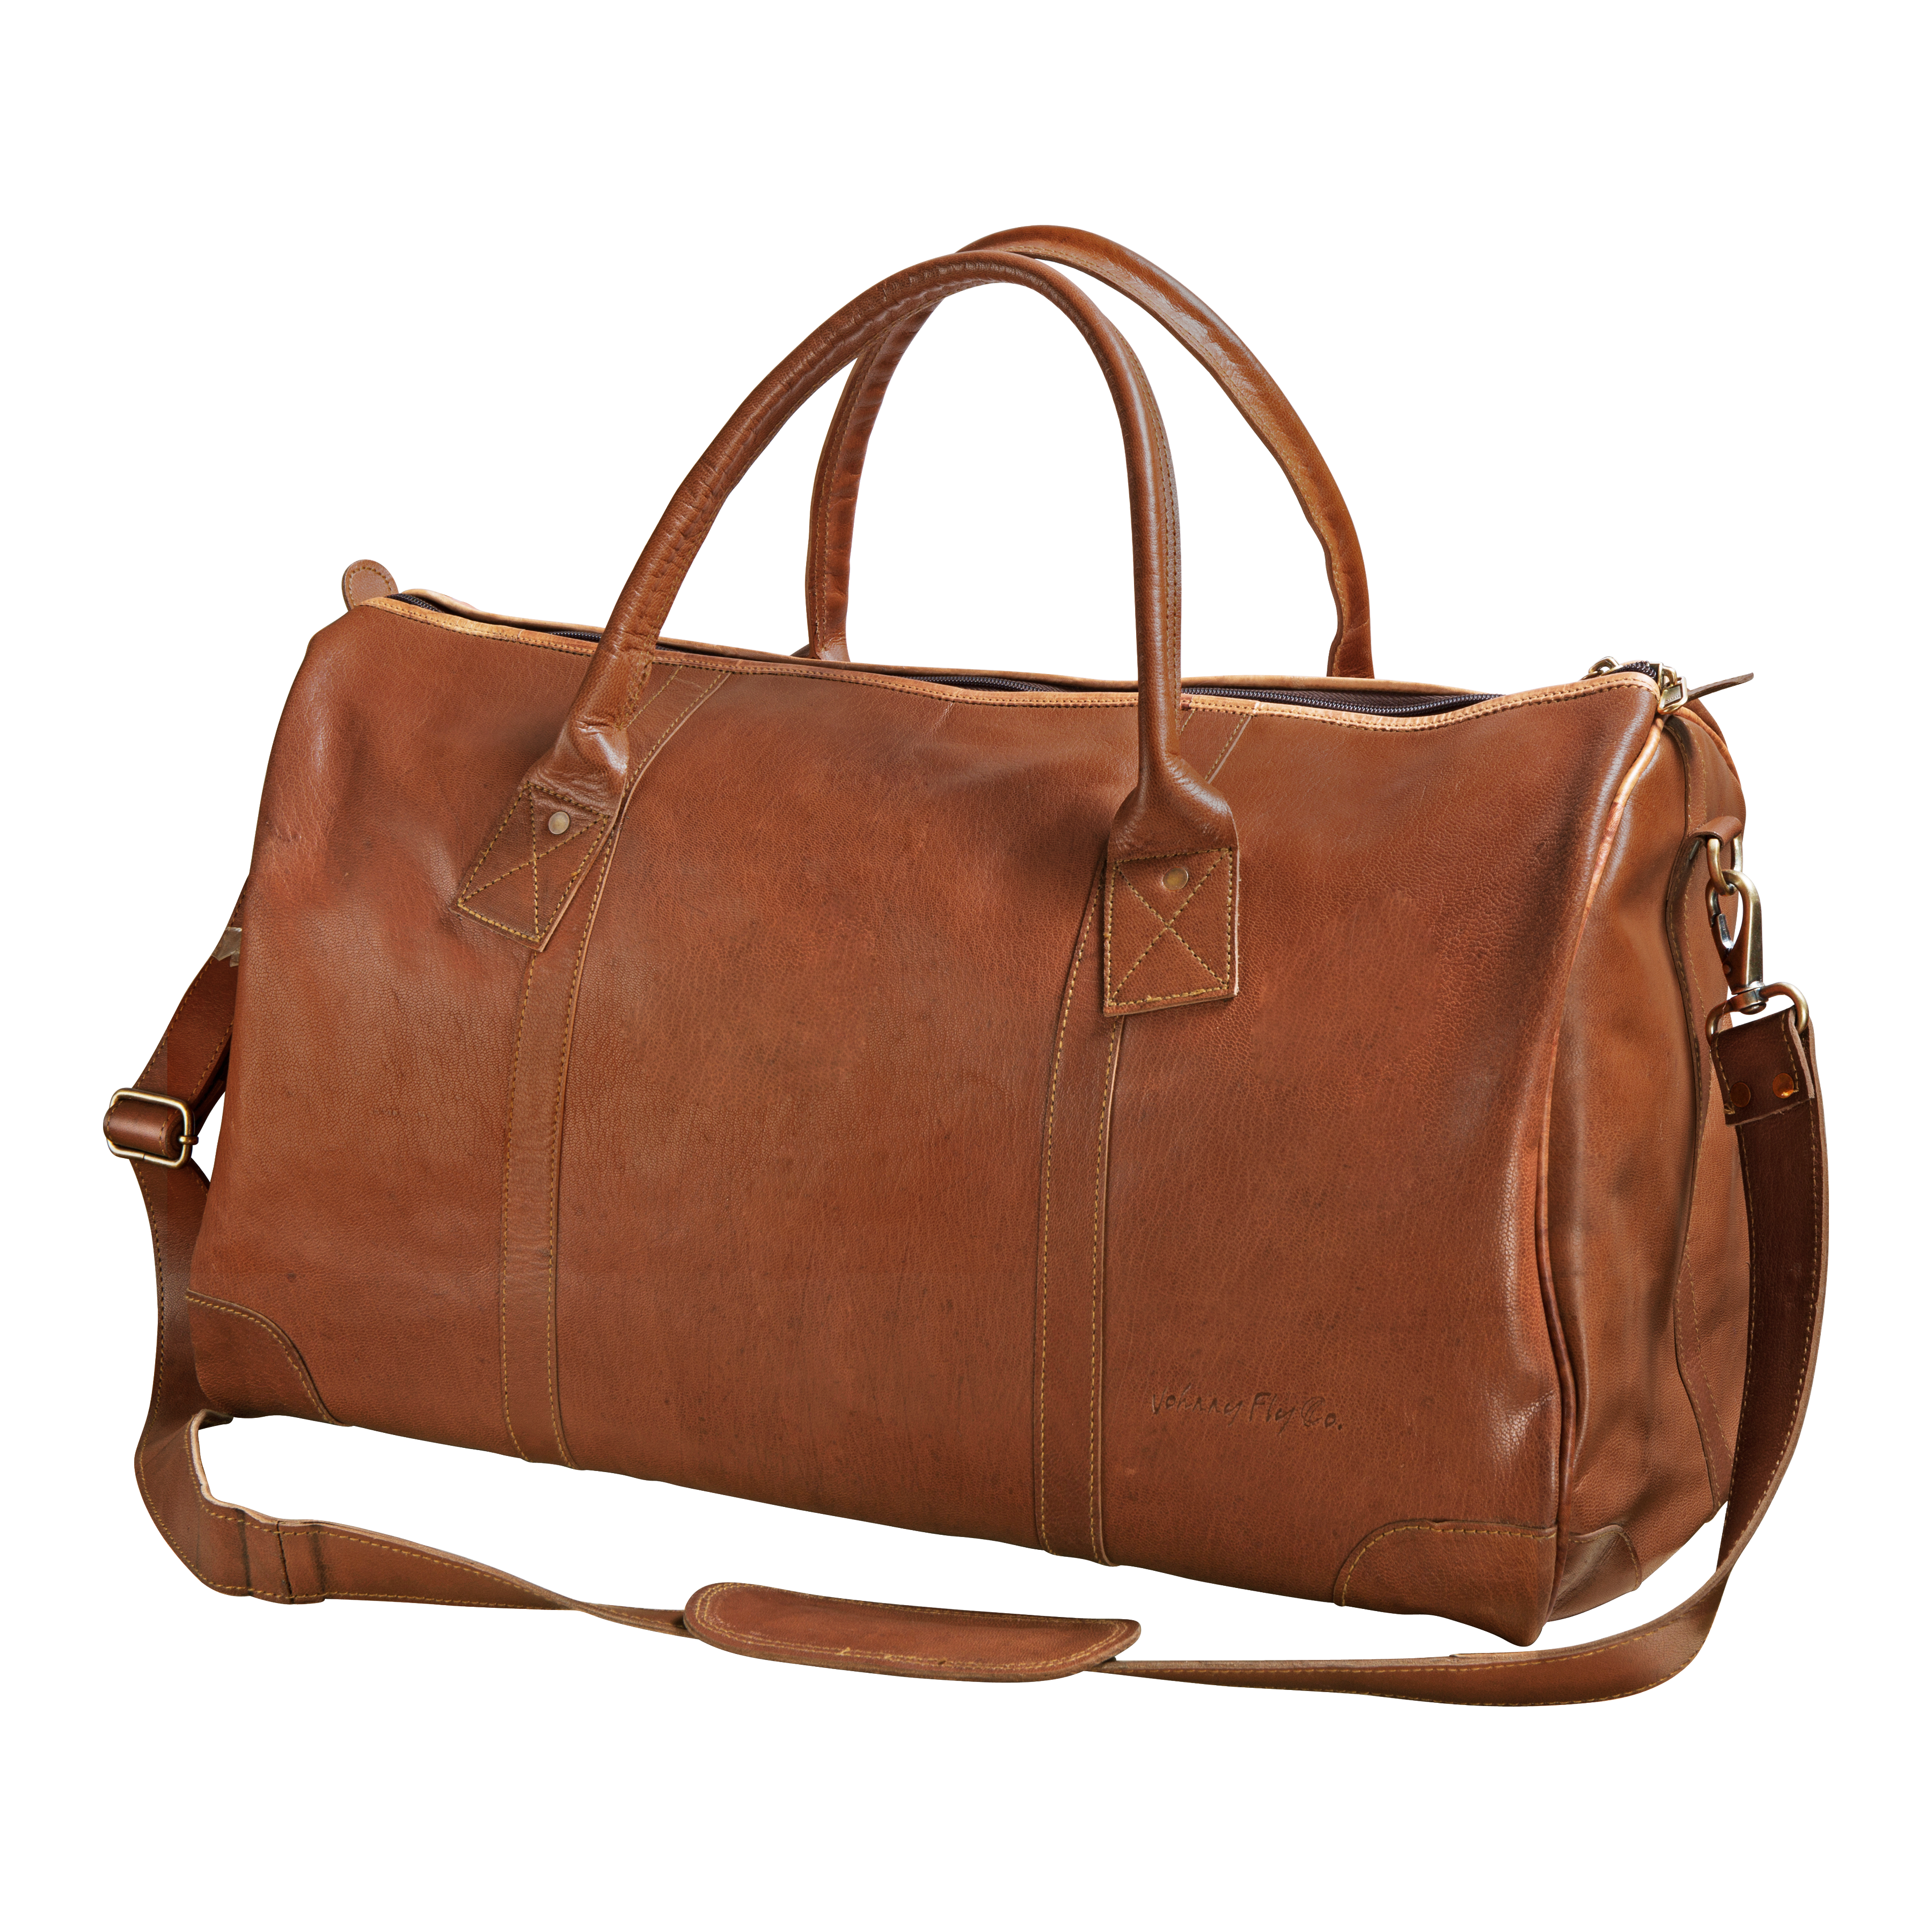 Traveler Duffle - Johnny Fly - One Size - Leather Bags